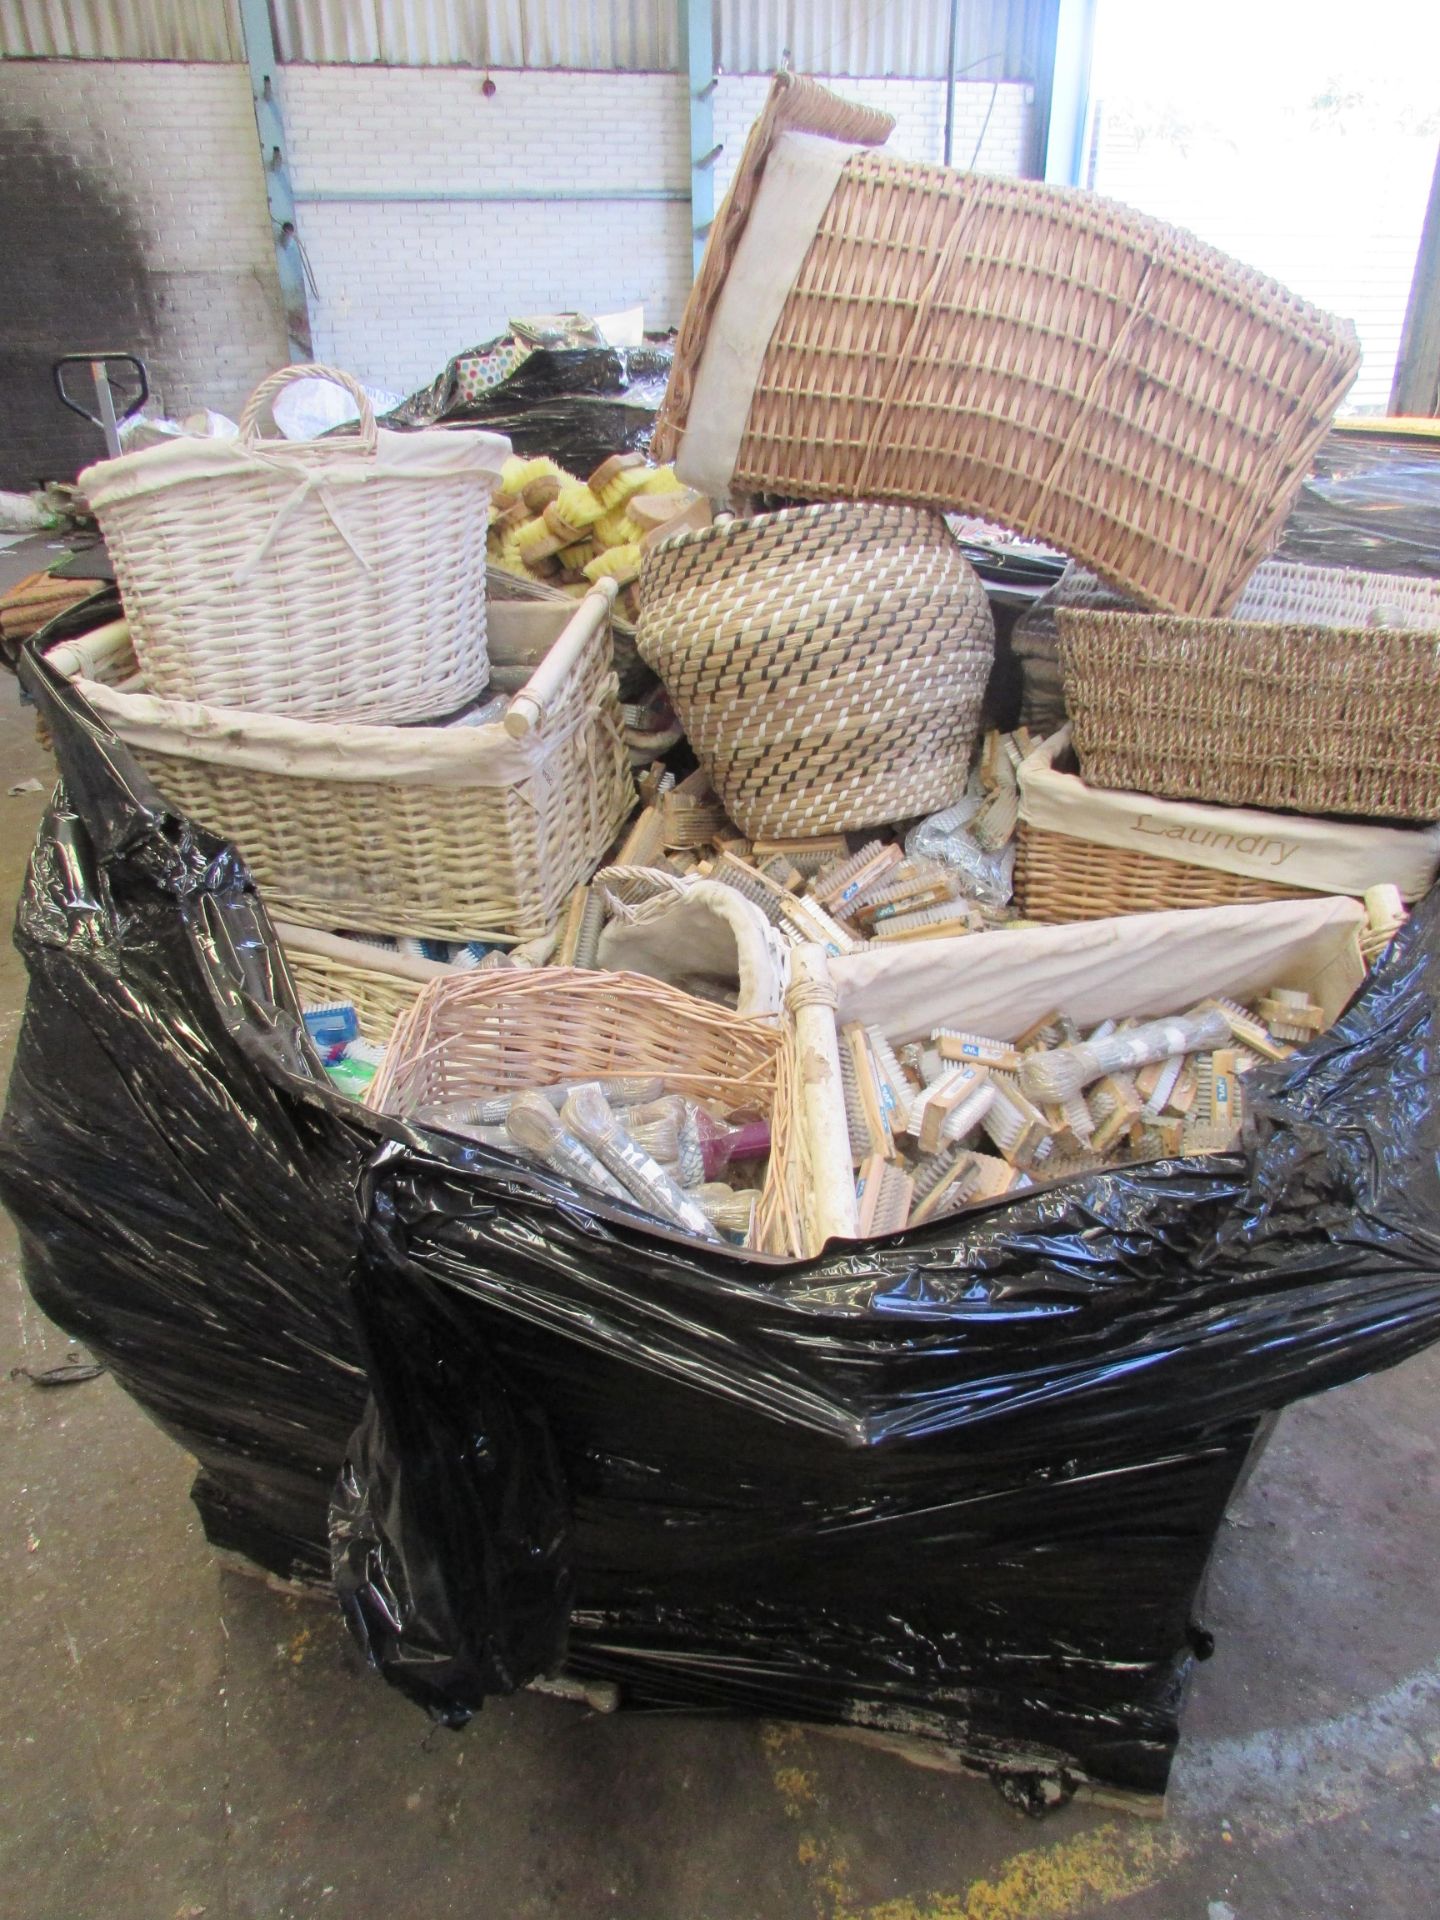 A Full Pallet Of Homewares Inc. Baskets, Brushes, Clothes Lines & More